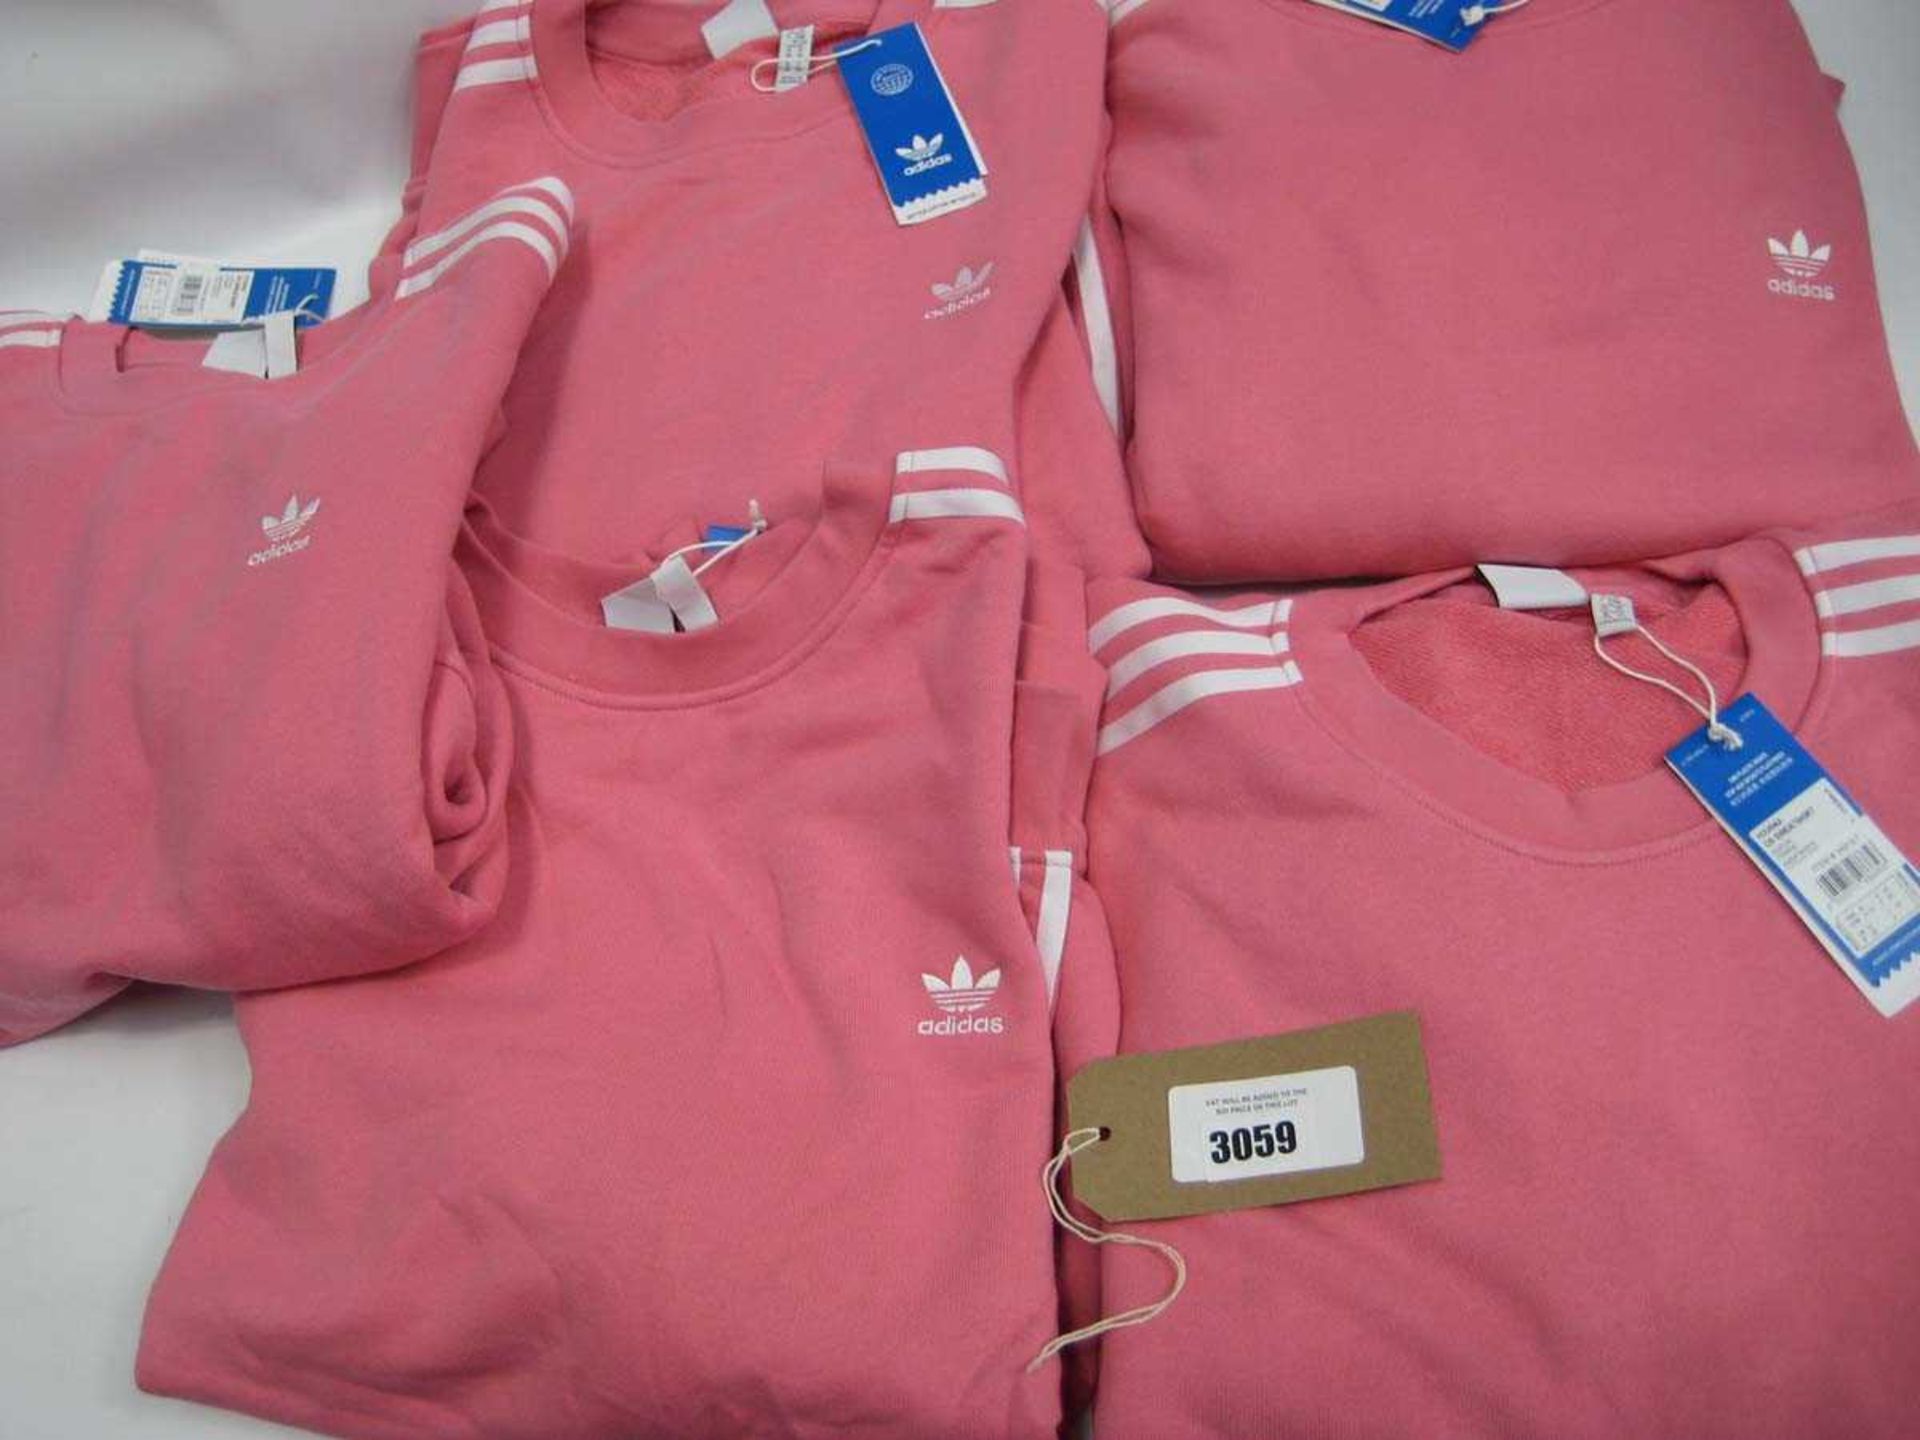 +VAT A bag containing 5 Ladies Pink Adidas Sweatshirts in Large and X Large.